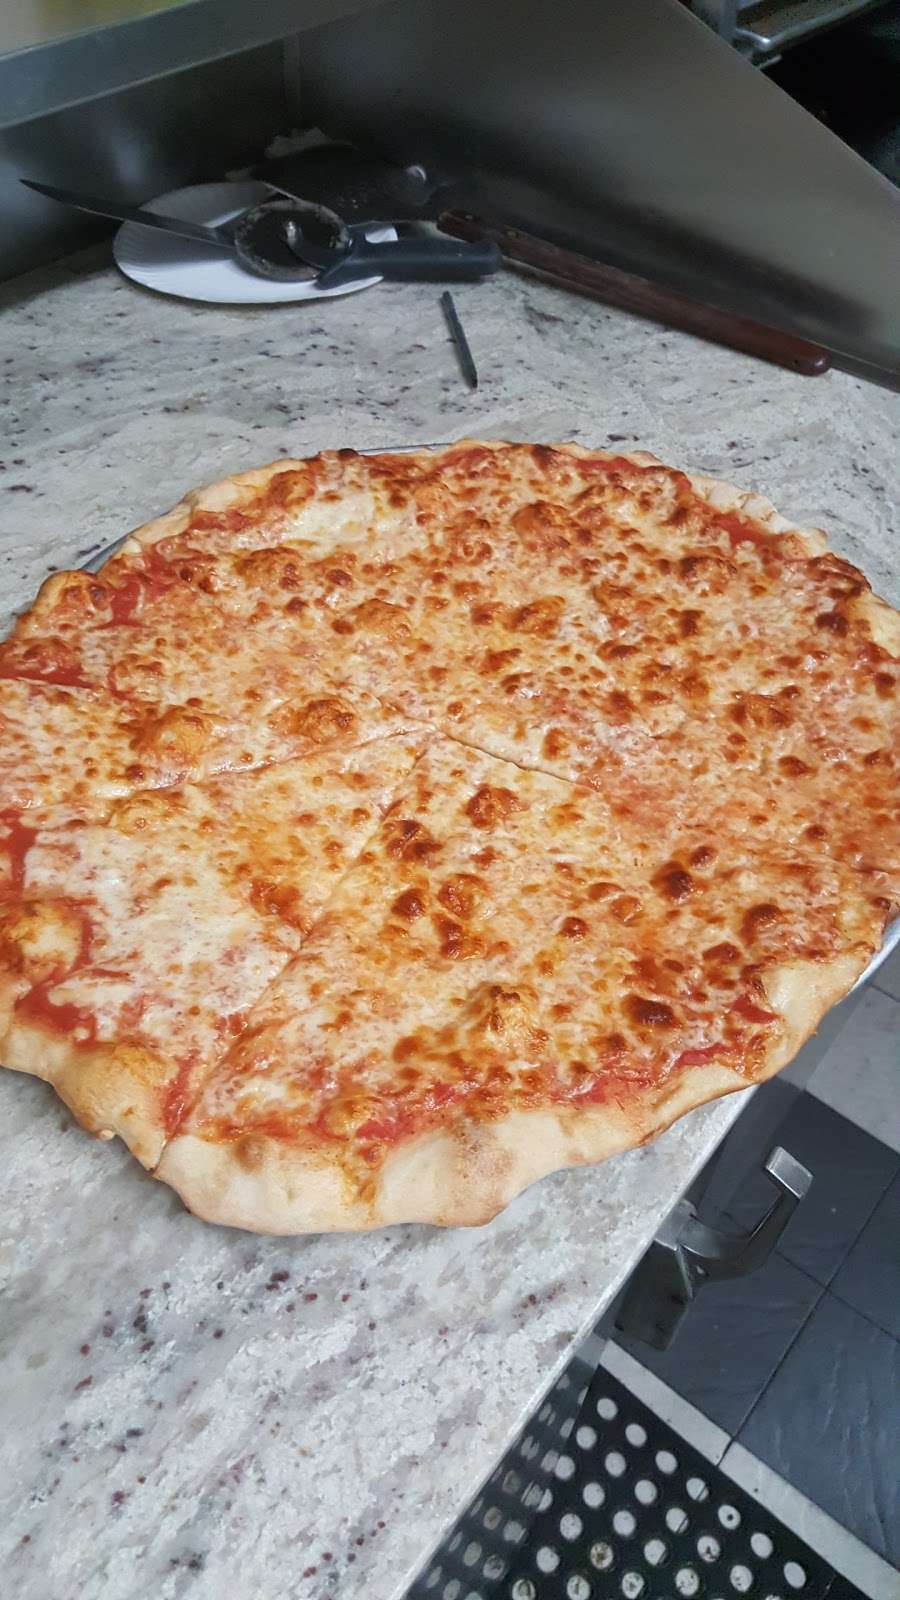 Tommys Pizza | 915 Cross Bay Blvd, Broad Channel, NY 11693 | Phone: (718) 945-6054